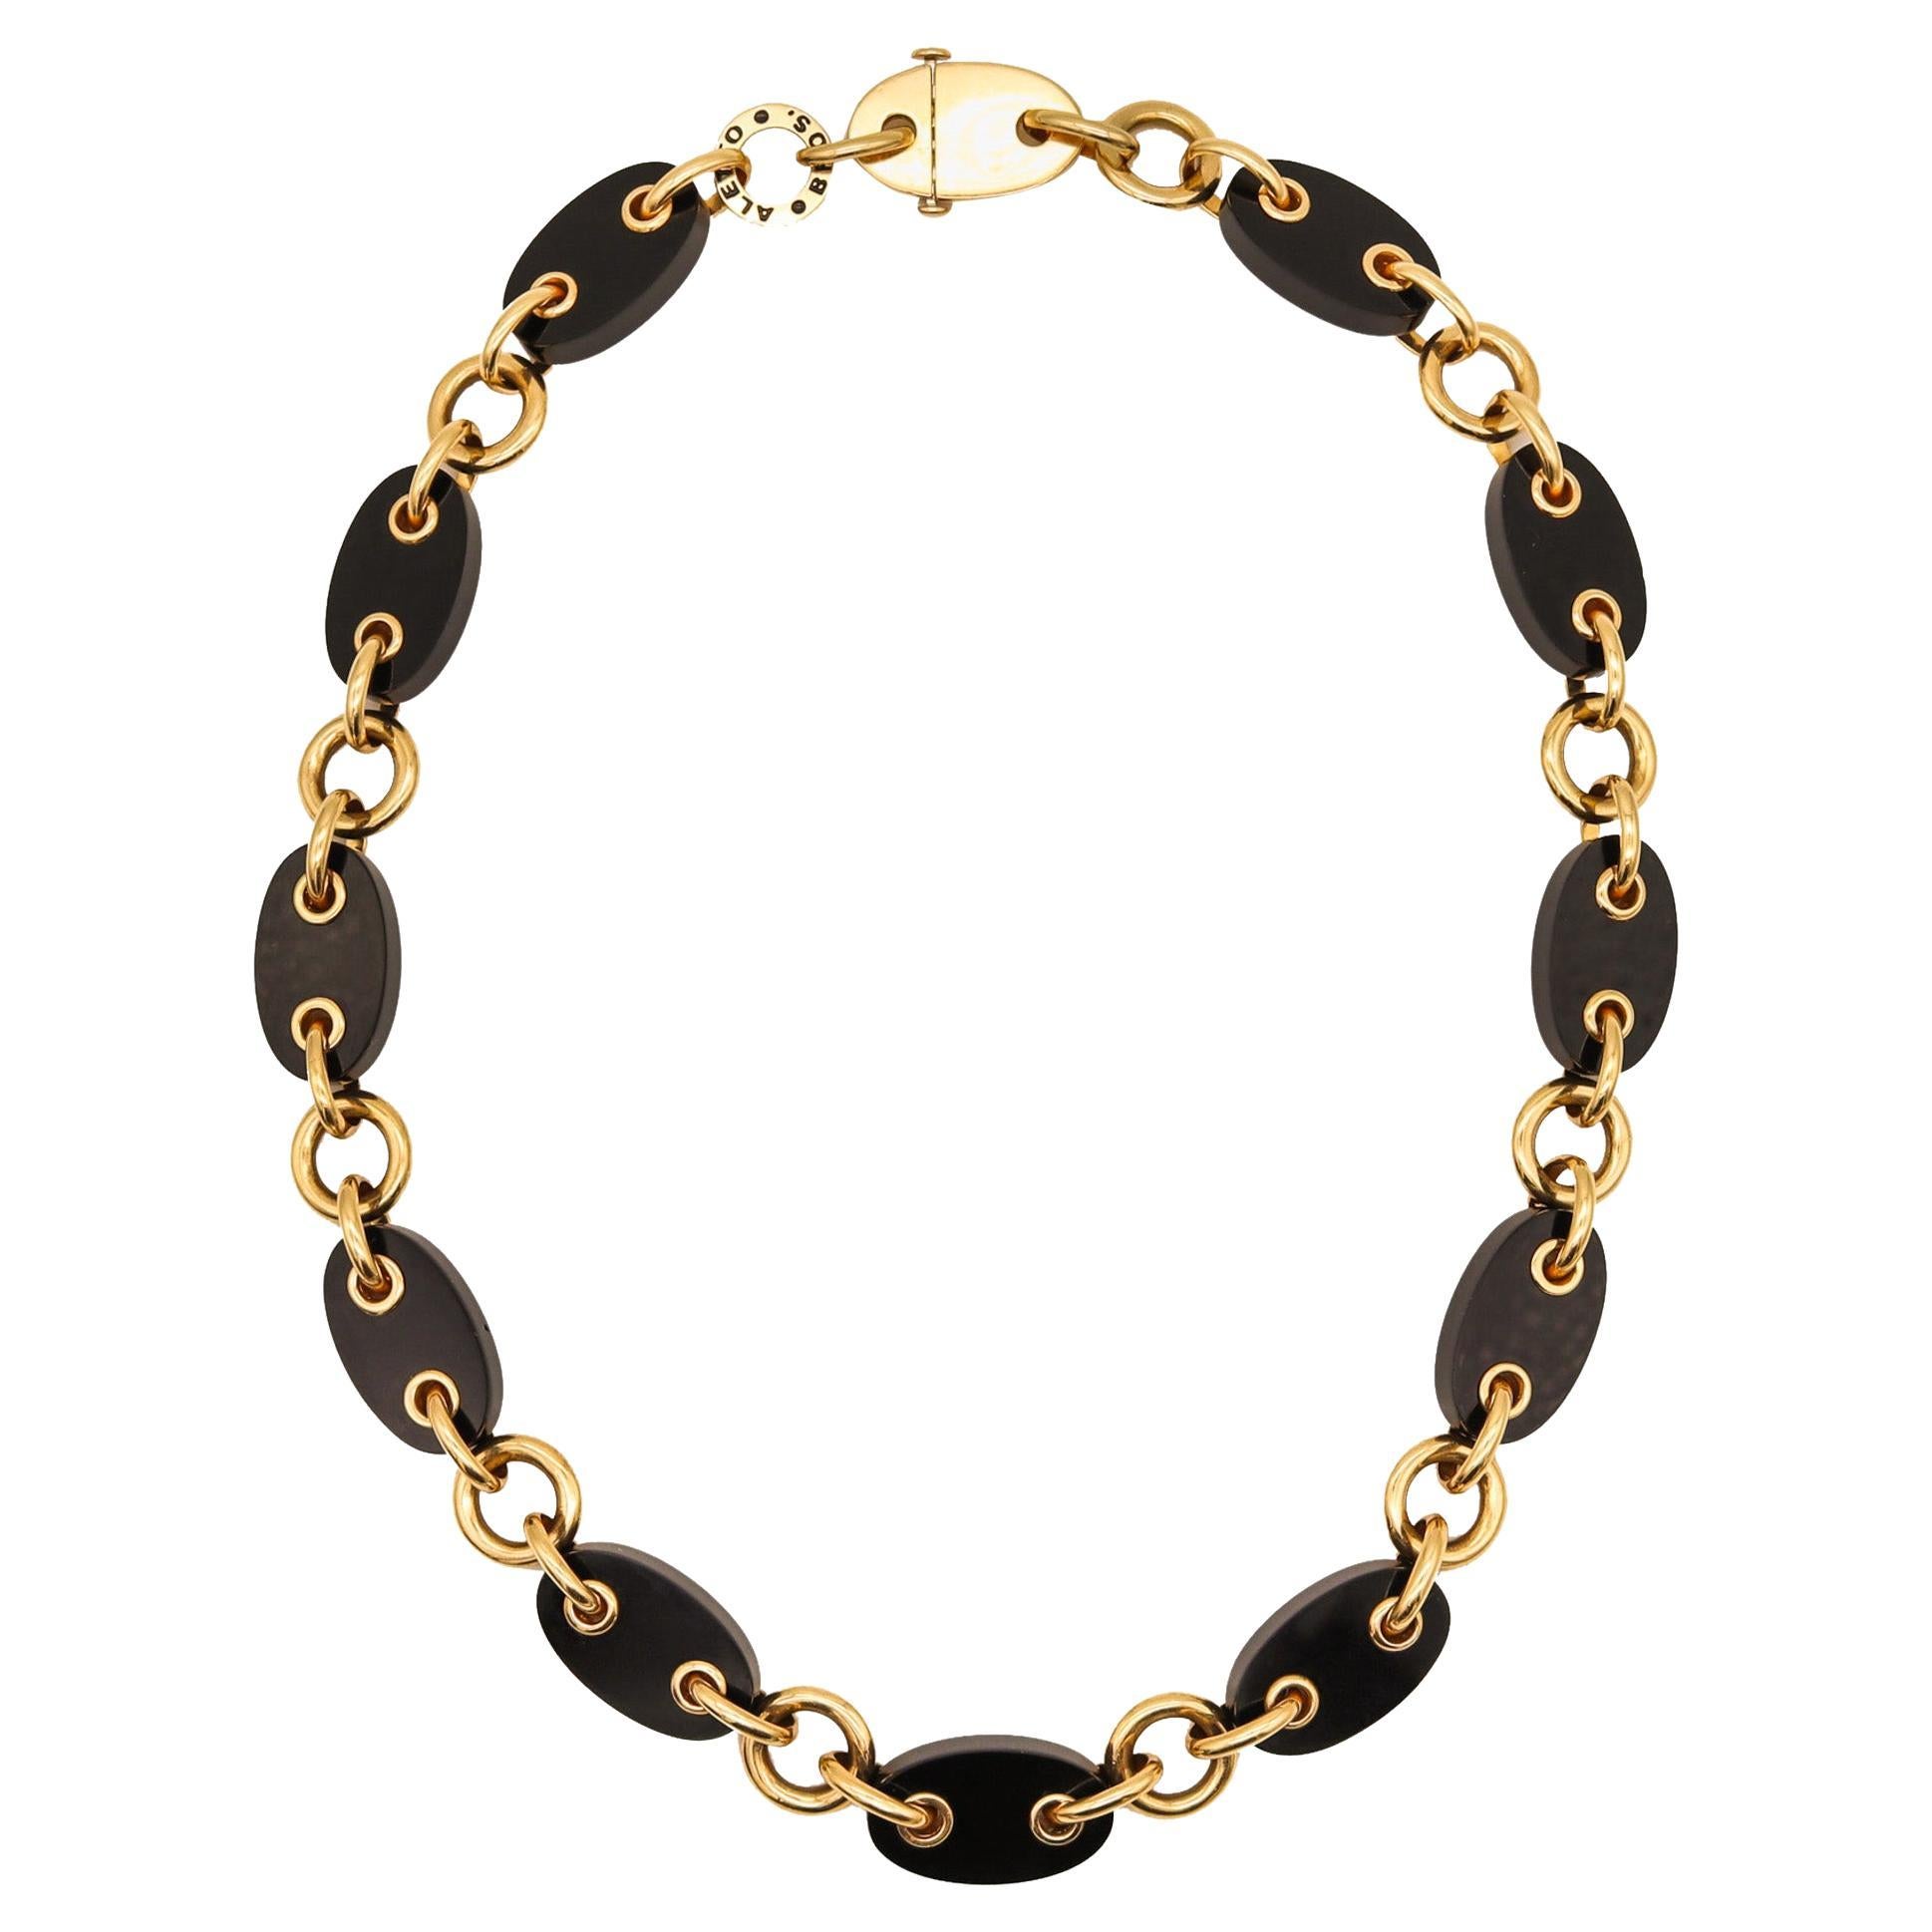 Aletto Brothers Geometric Mariner Necklace in 18kt Yellow Gold with Black Onyxes